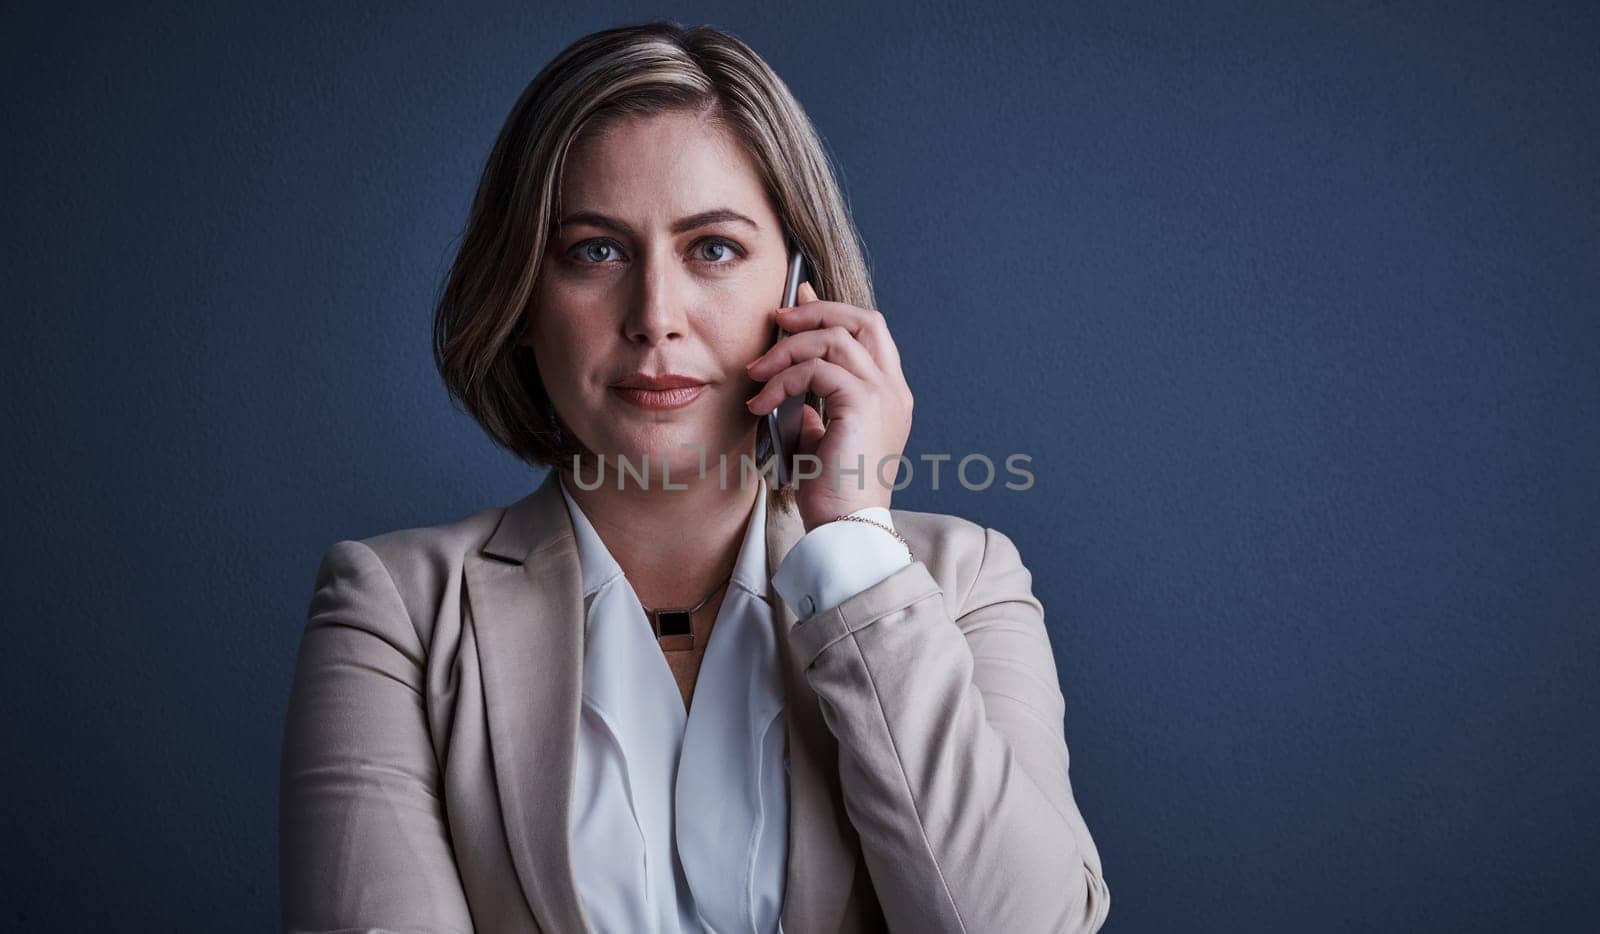 Listening intently. Studio portrait of an attractive young corporate businesswoman making a call against a dark background